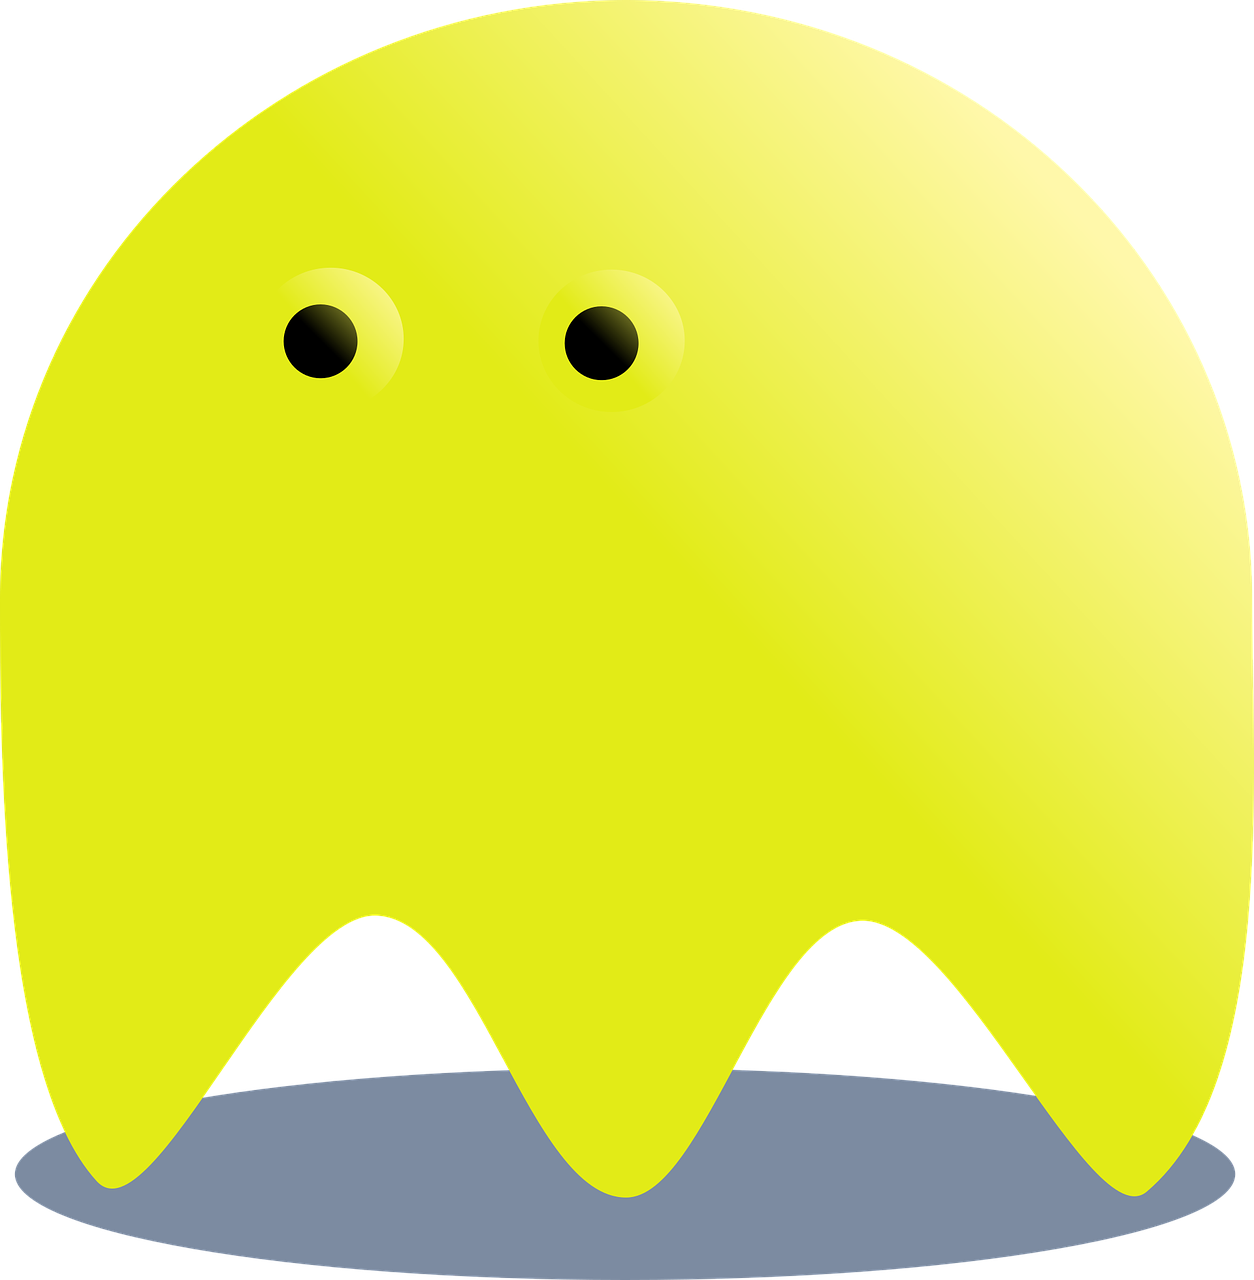 yellow ghost pacman free photo